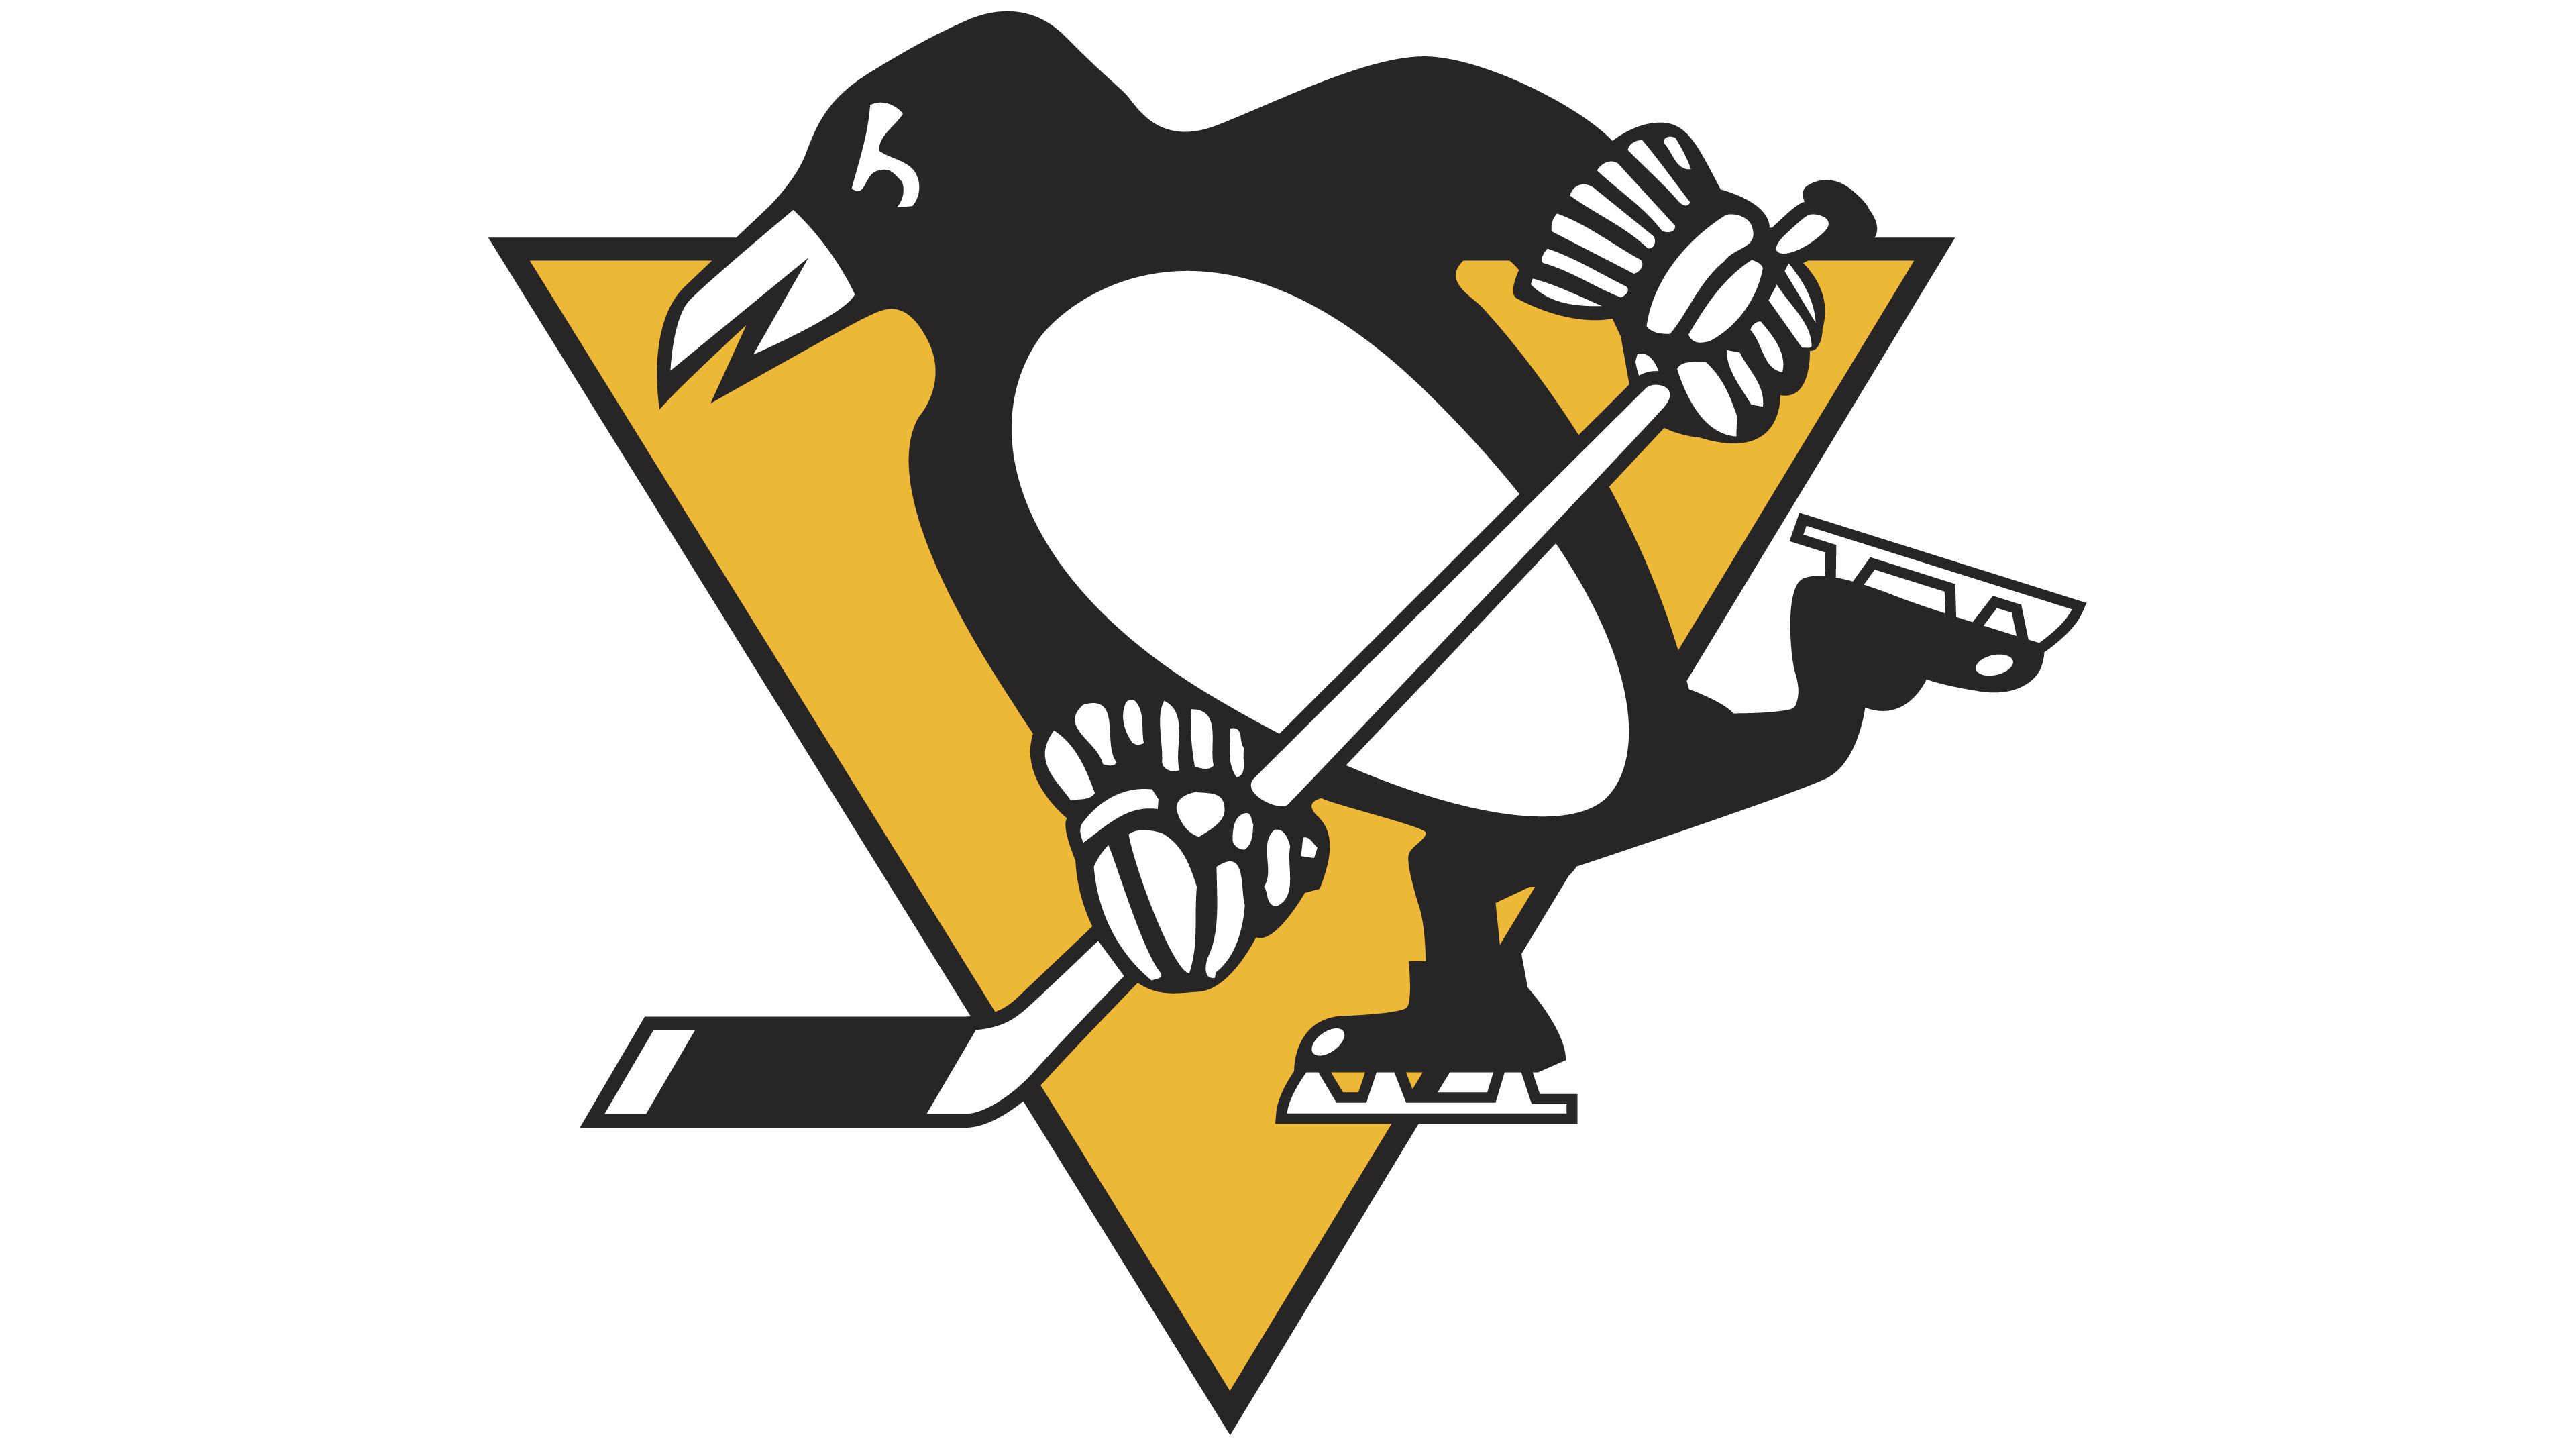 Pengiuns Logo - Pittsburgh Penguins logo - Interesting History of the Team Name and ...